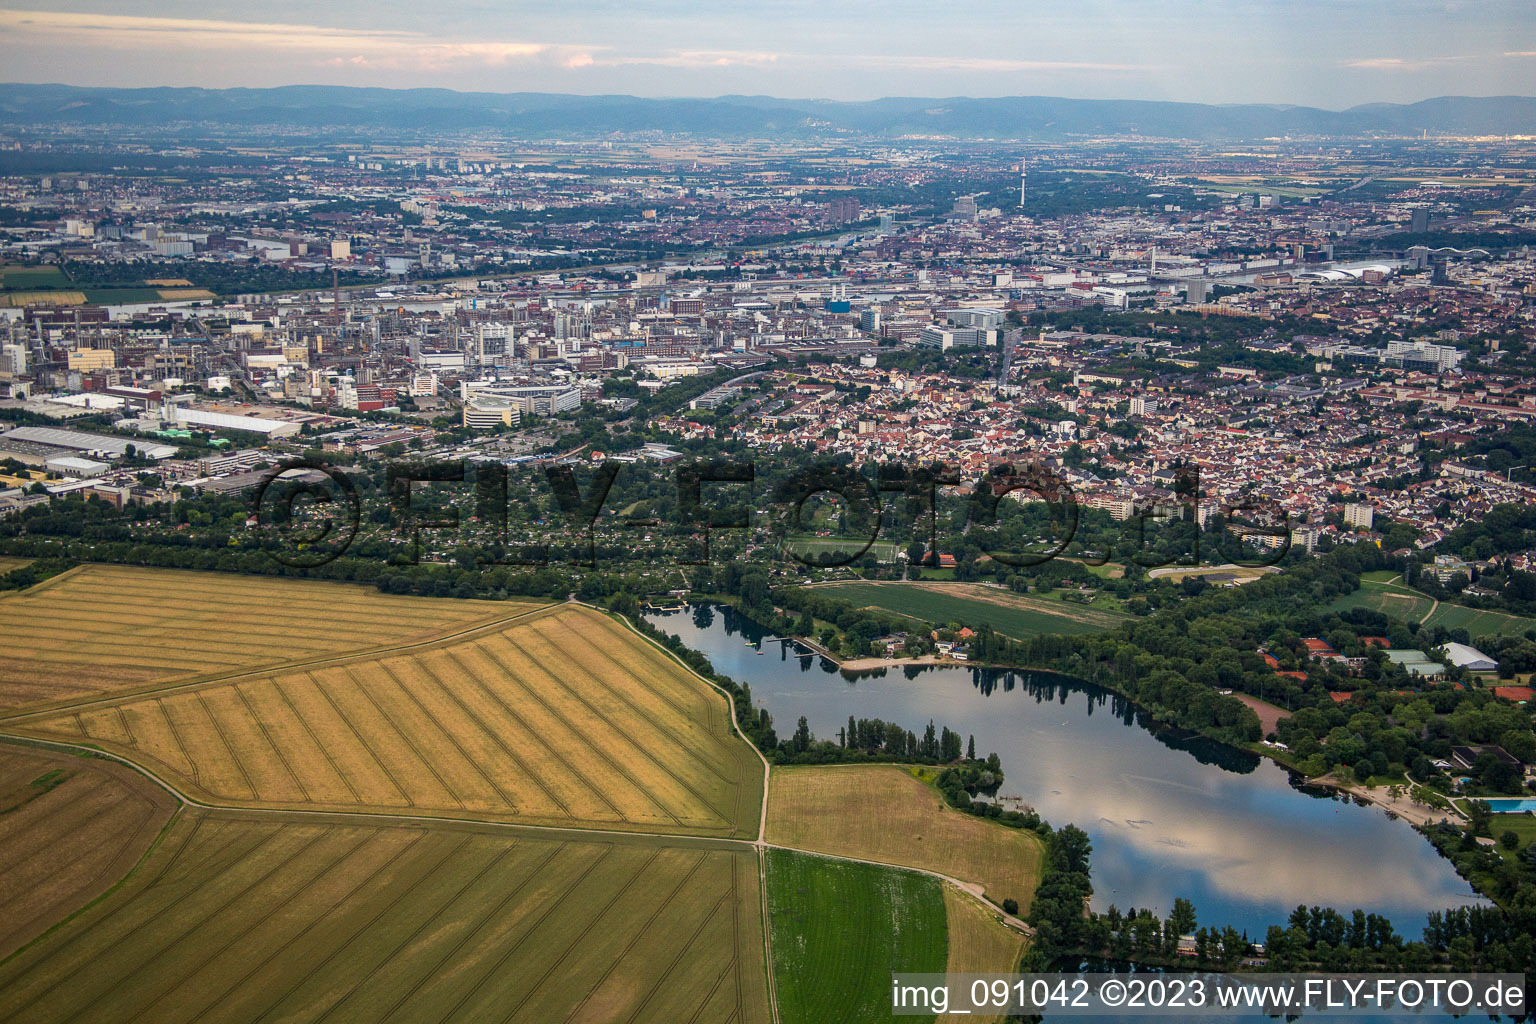 BASF from the west in the district Friesenheim in Ludwigshafen am Rhein in the state Rhineland-Palatinate, Germany